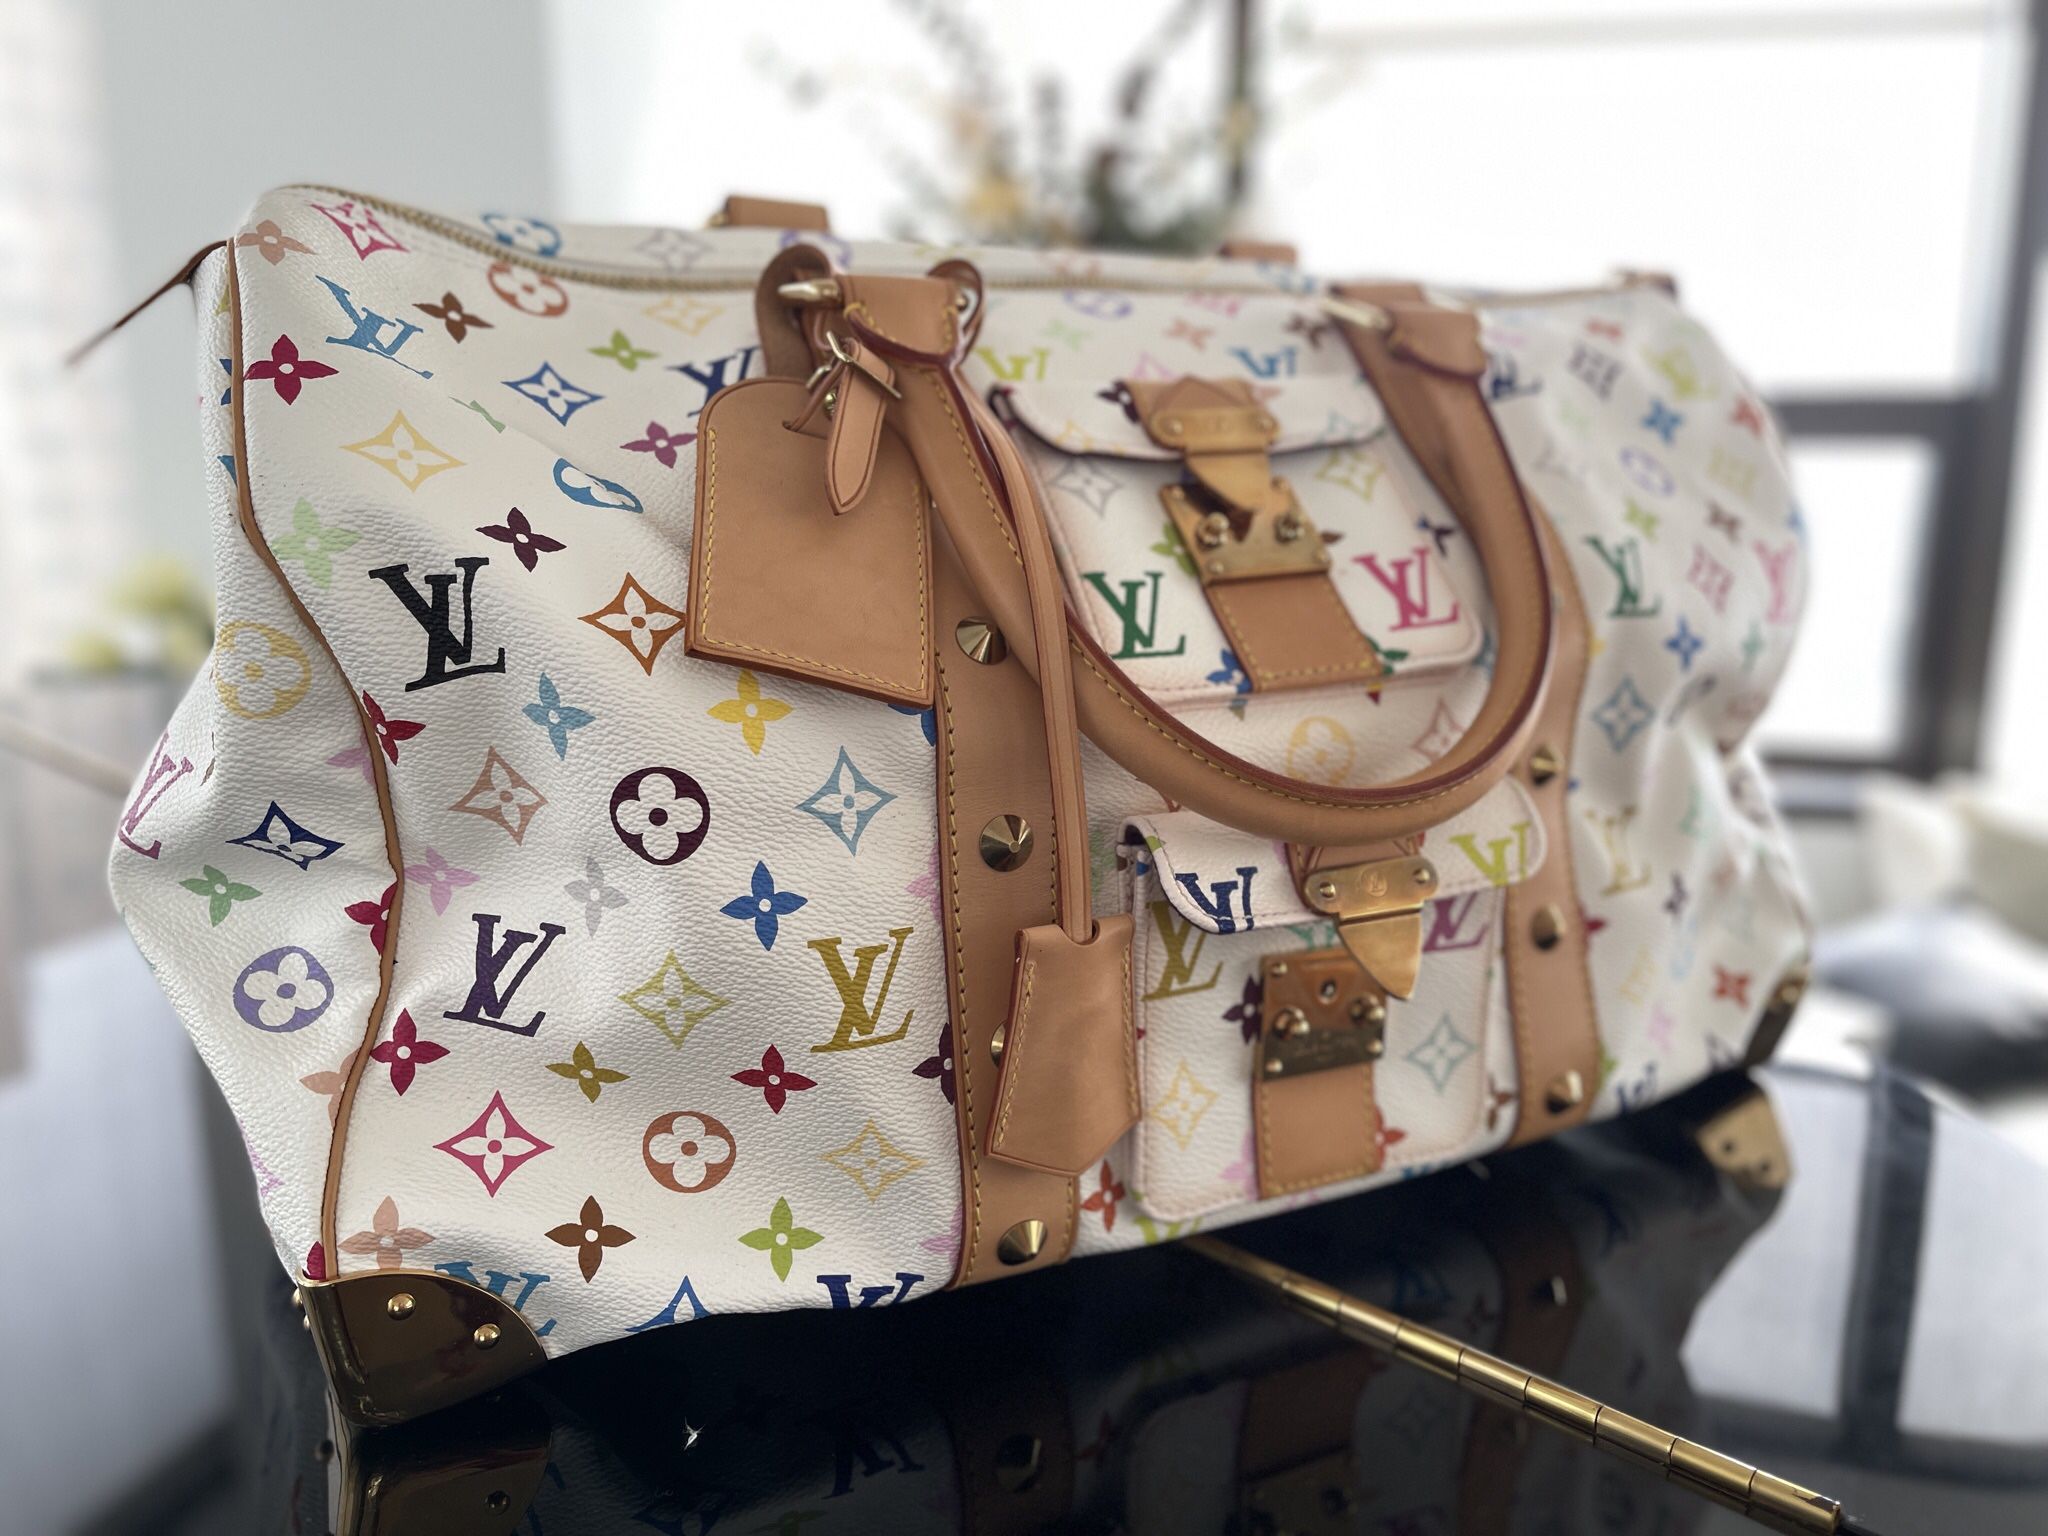 Gently Used Louis Vuitton Bag for Sale in Overland, MO - OfferUp